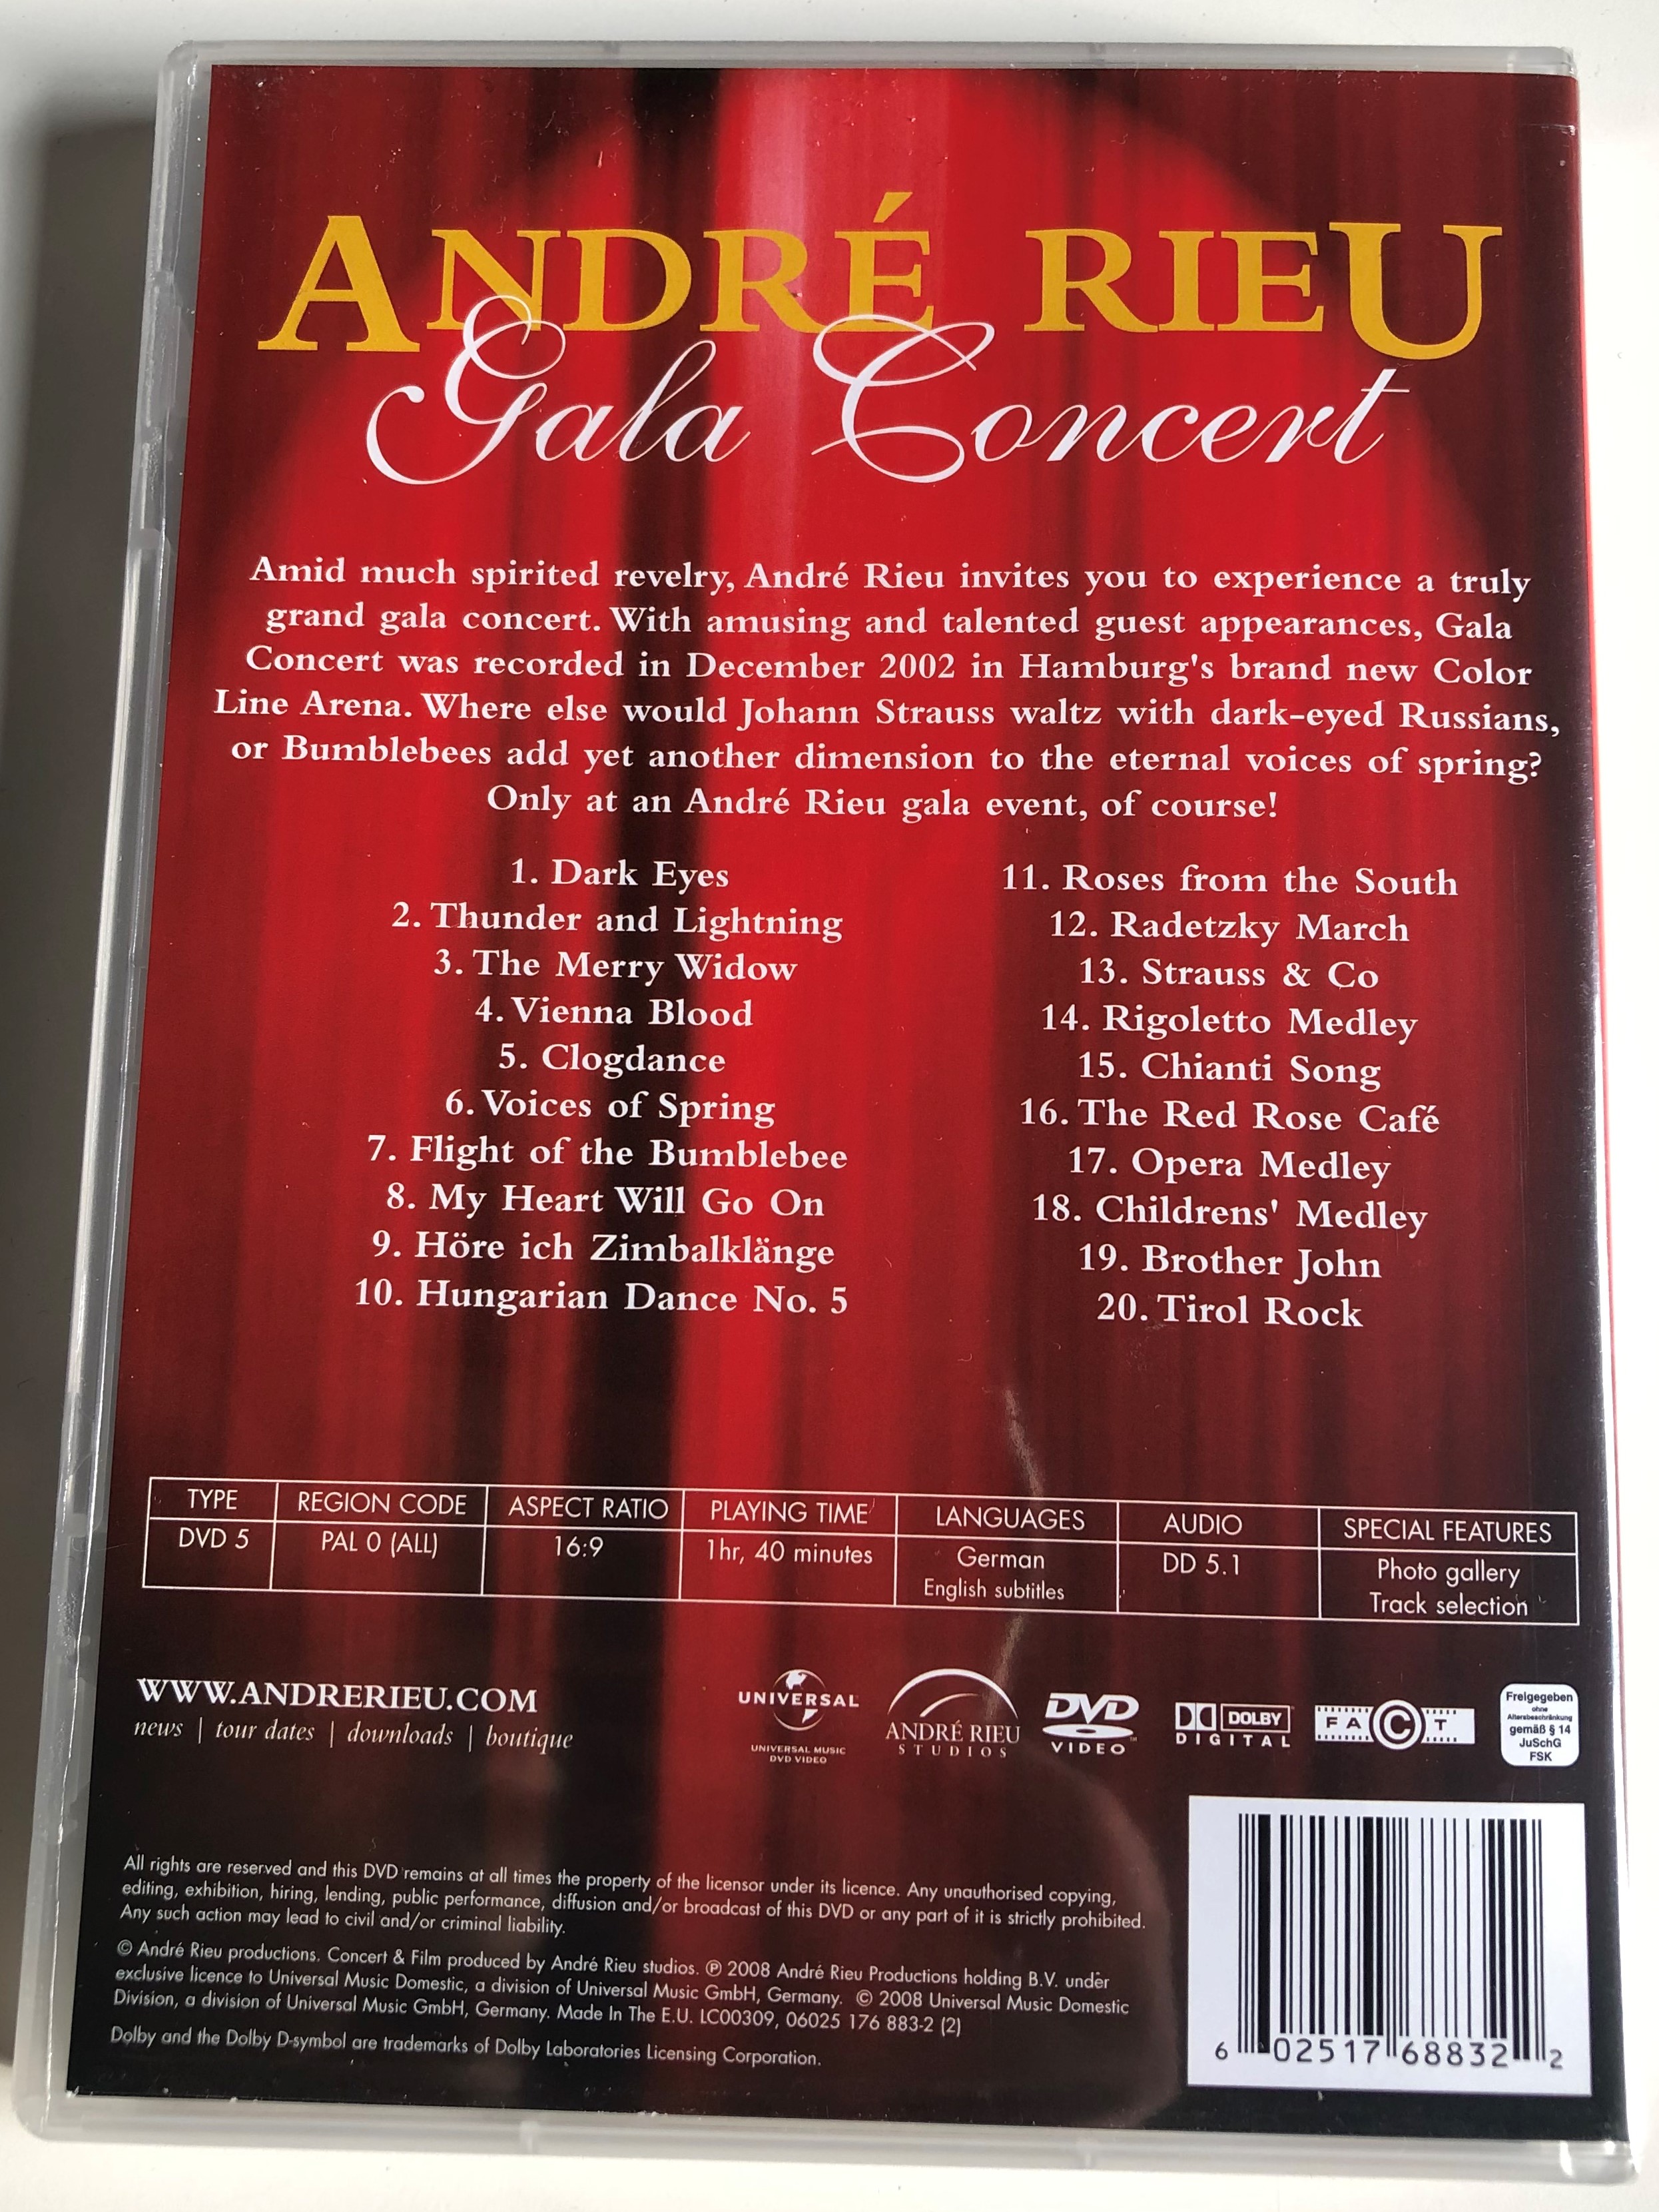 André Rieu Gala Concert DVD 2008 Hamburg Color Line Arena 2002 / Dark Eyes,  Vienna Blood, Hungarian Dance No. 5, Roses from the South / Universal music  / LC00309 - bibleinmylanguage